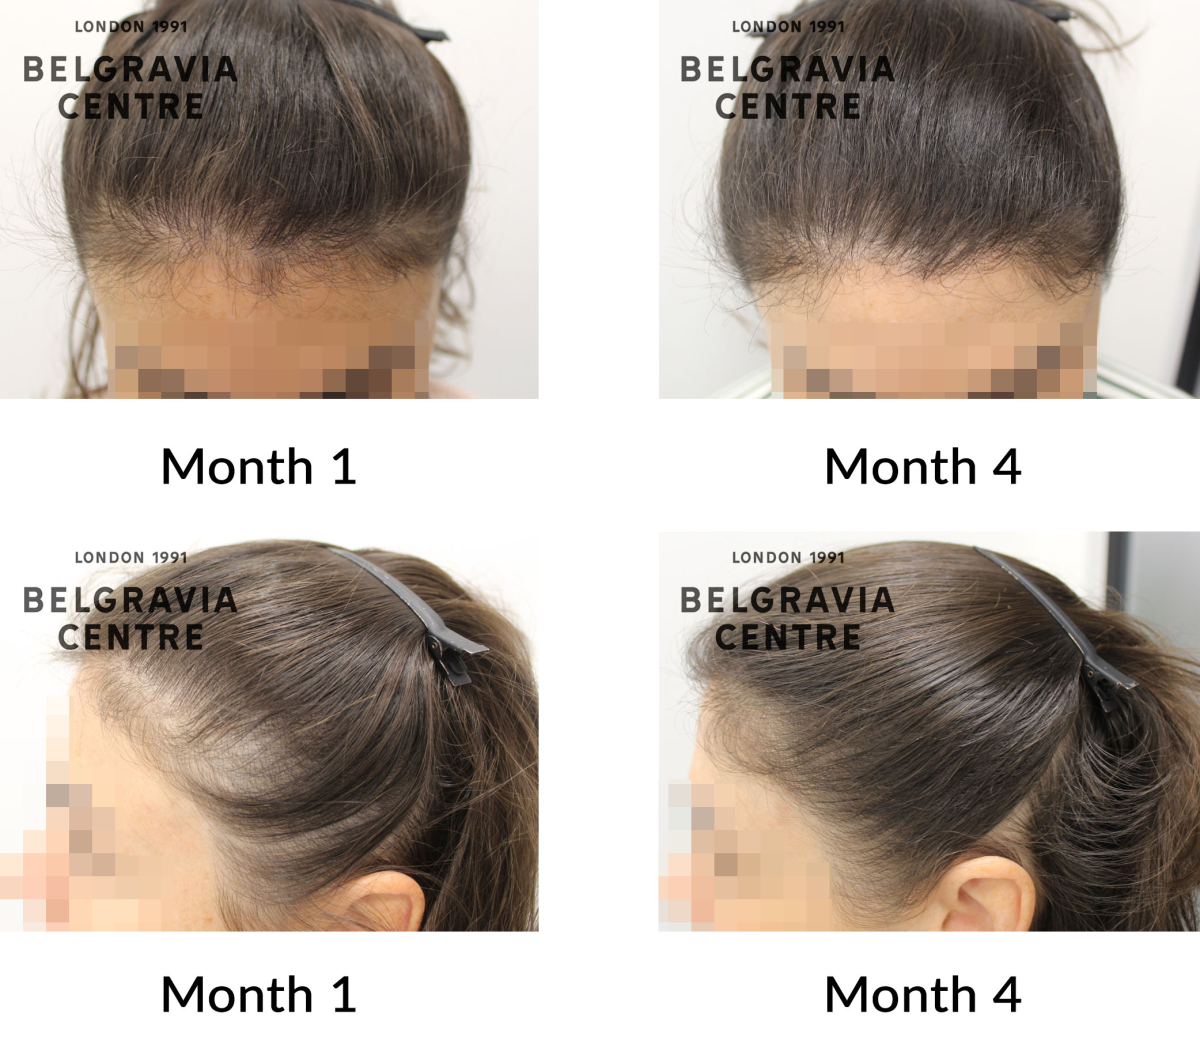 female pattern hair loss and diffuse thinning the belgravia centre 424430